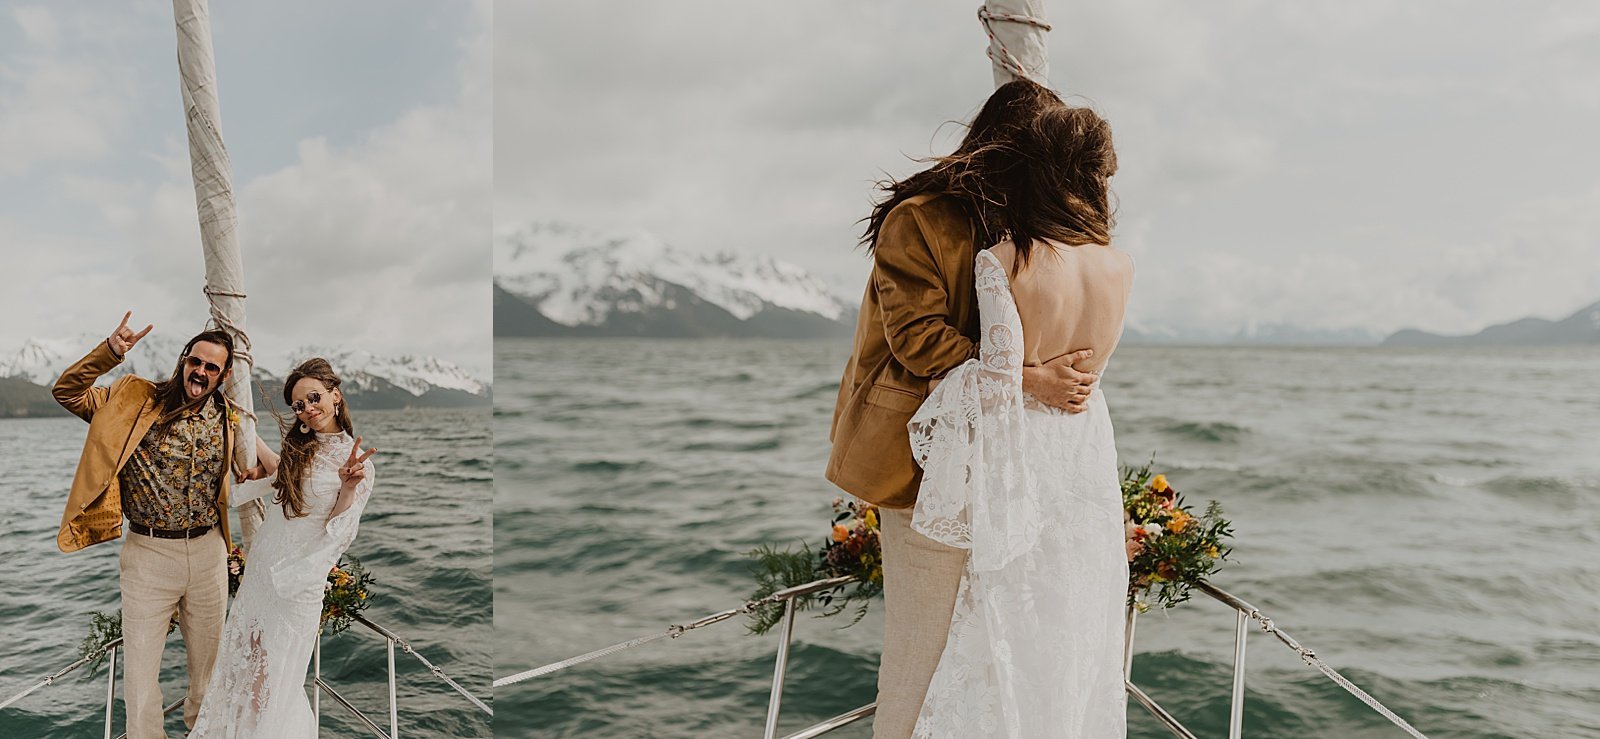  Newlyweds looking out over the water on a boat in Alaska  